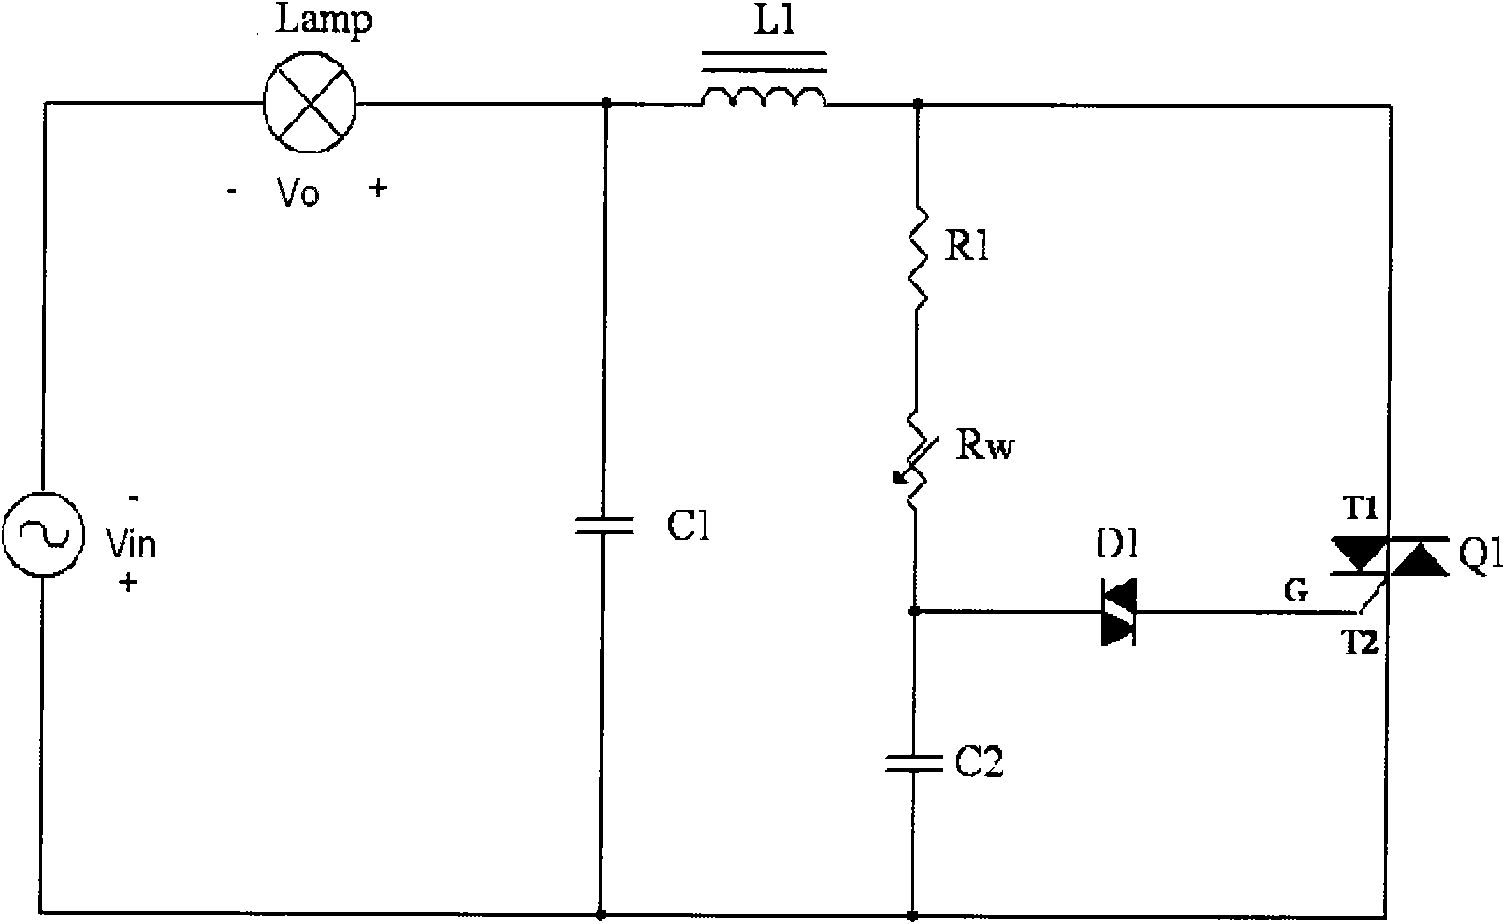 LED lighting driving circuit and method by using compatible silicon controlled light adjuster to adjust light